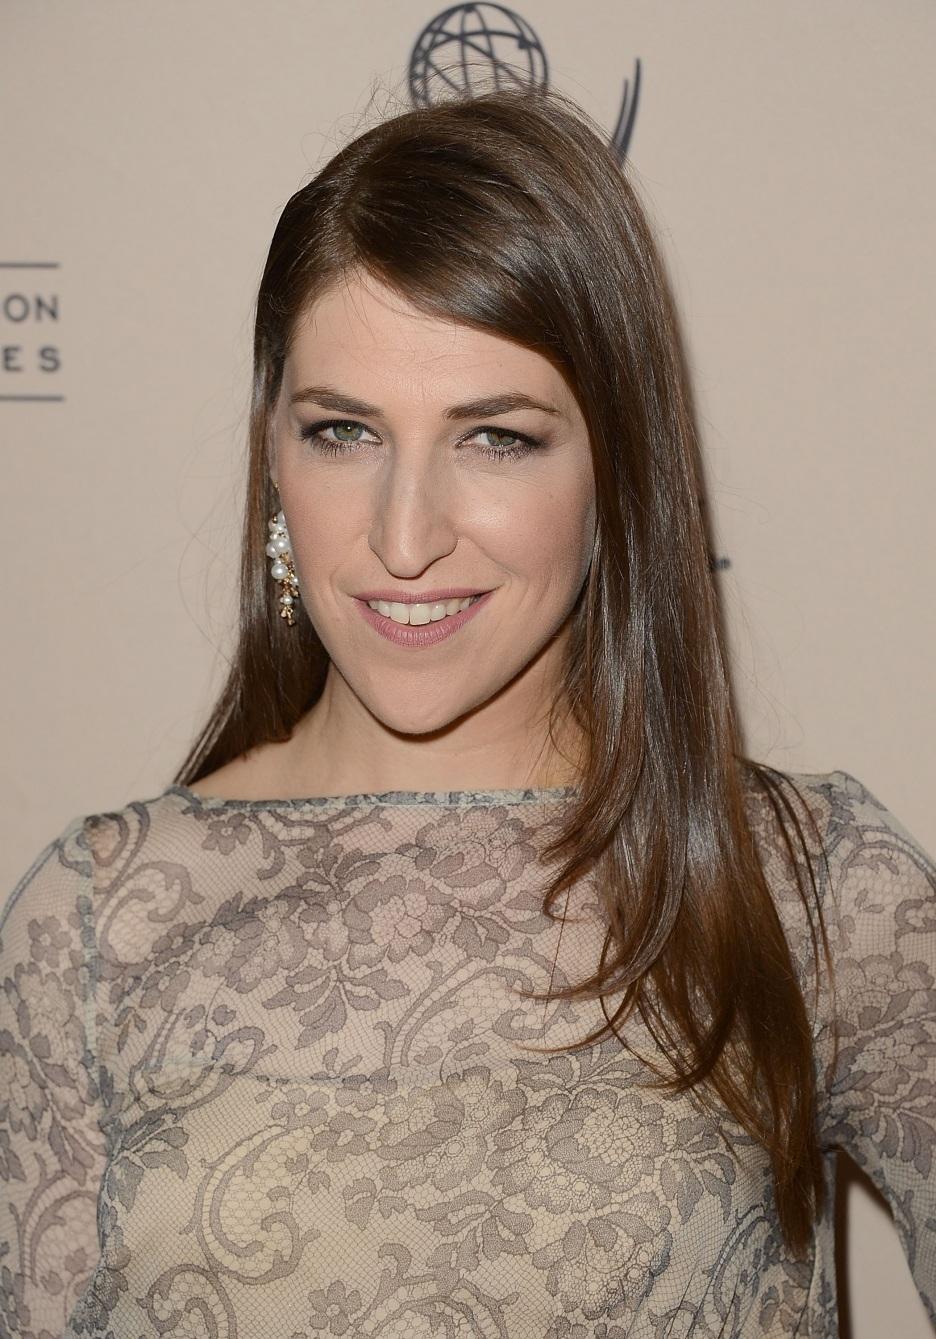 More Pictures Of Mayim Bialik. 